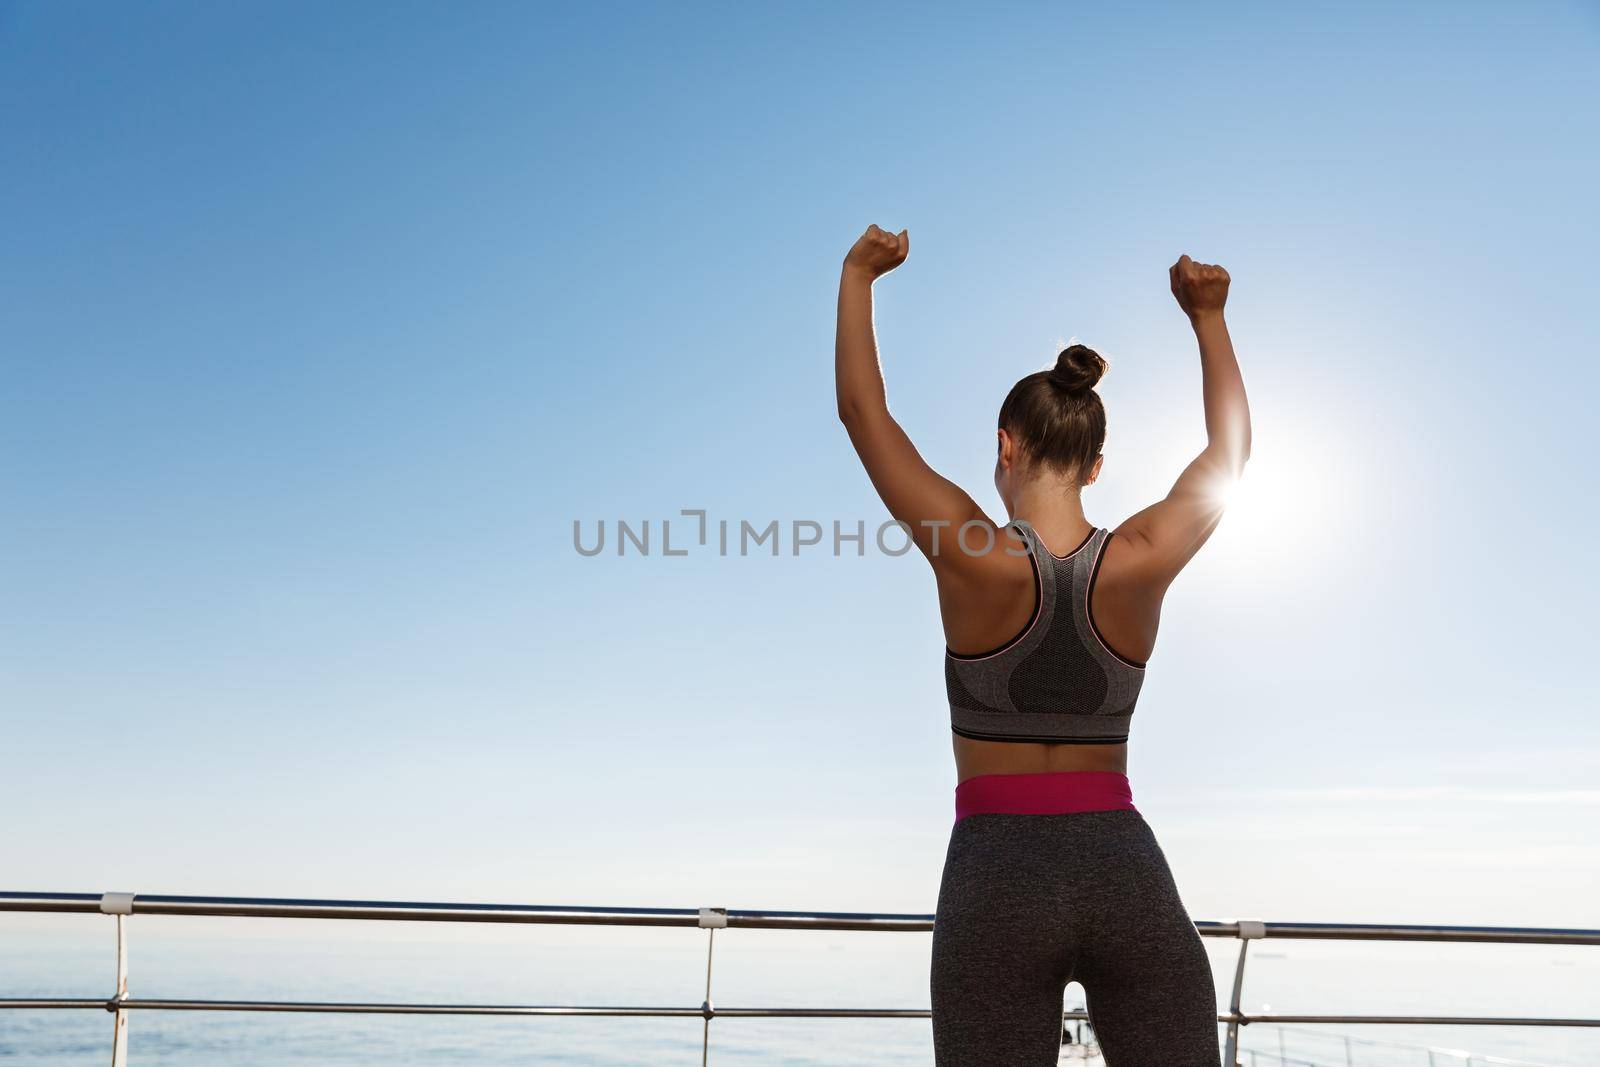 Rear view of happy and satisfied fitness woman looking at the sea and raising hands up like champion, achieve goal during workout or jogging on the seaside promenade.